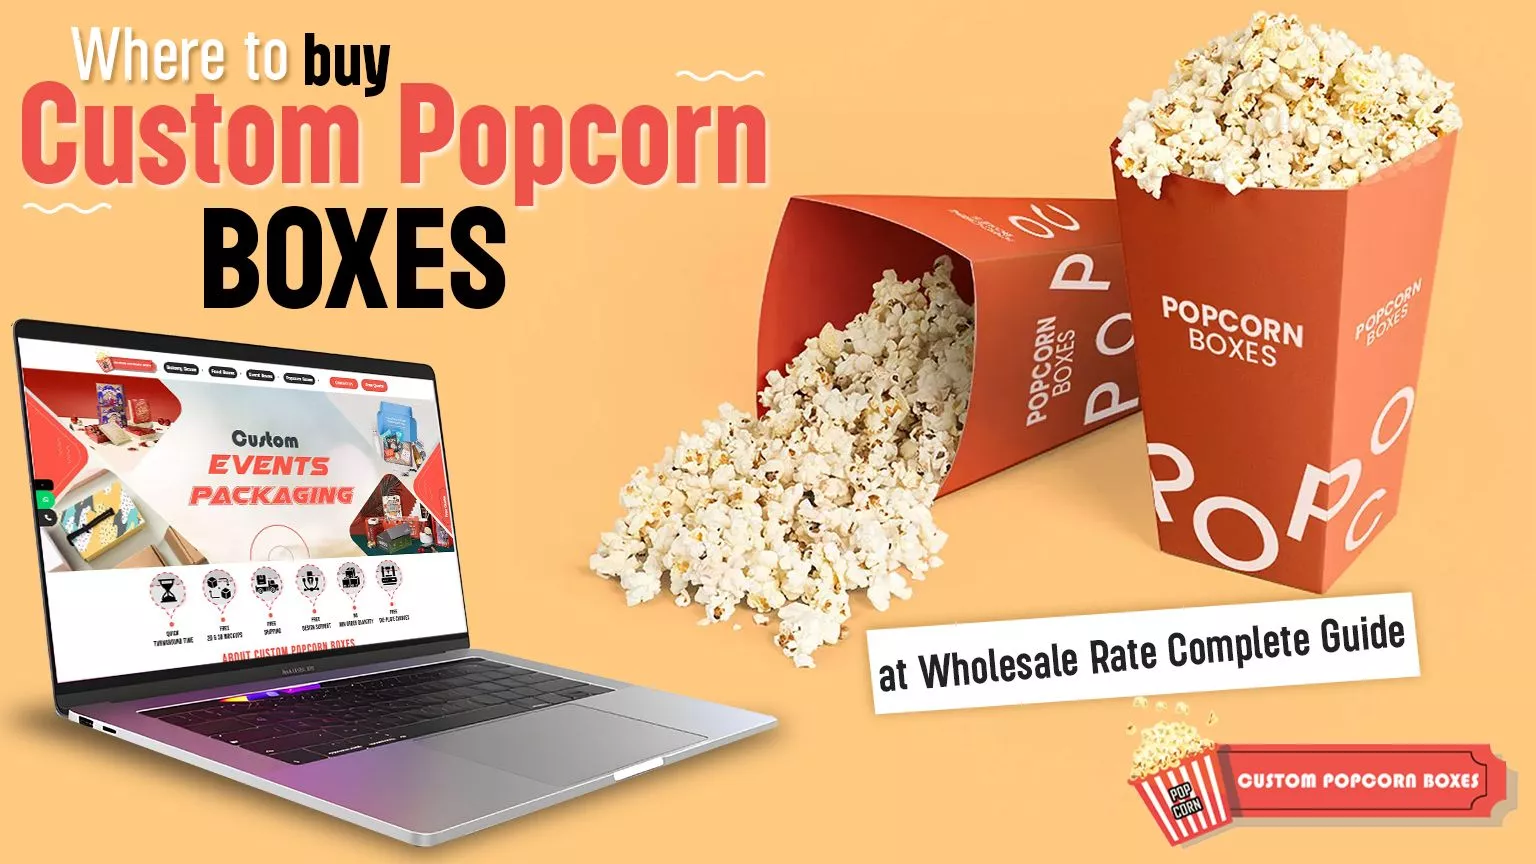 Where-to-buy-Custom-Popcorn-Boxes-at-Wholesale-Rate-Complete-Guide